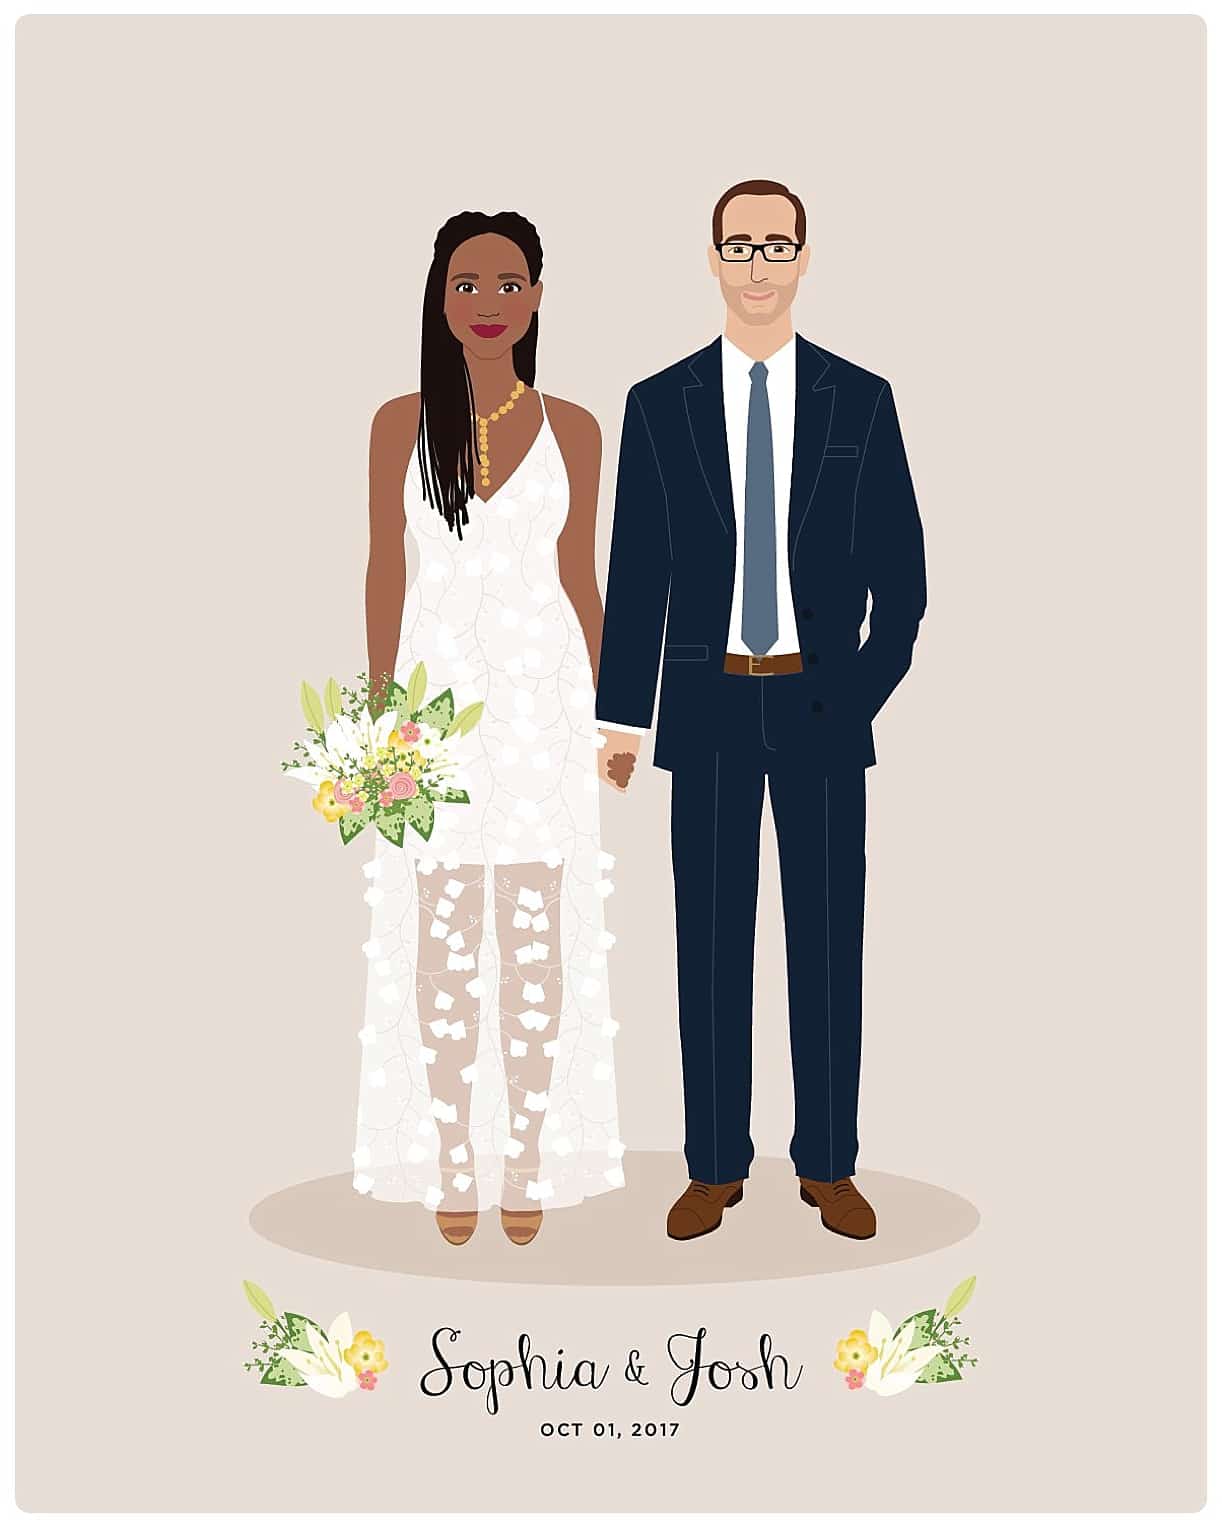 Personalized Gift Ideas for Newlyweds Couples | Hill City Bride Virginia Wedding Blog Digital Portrait Groom 